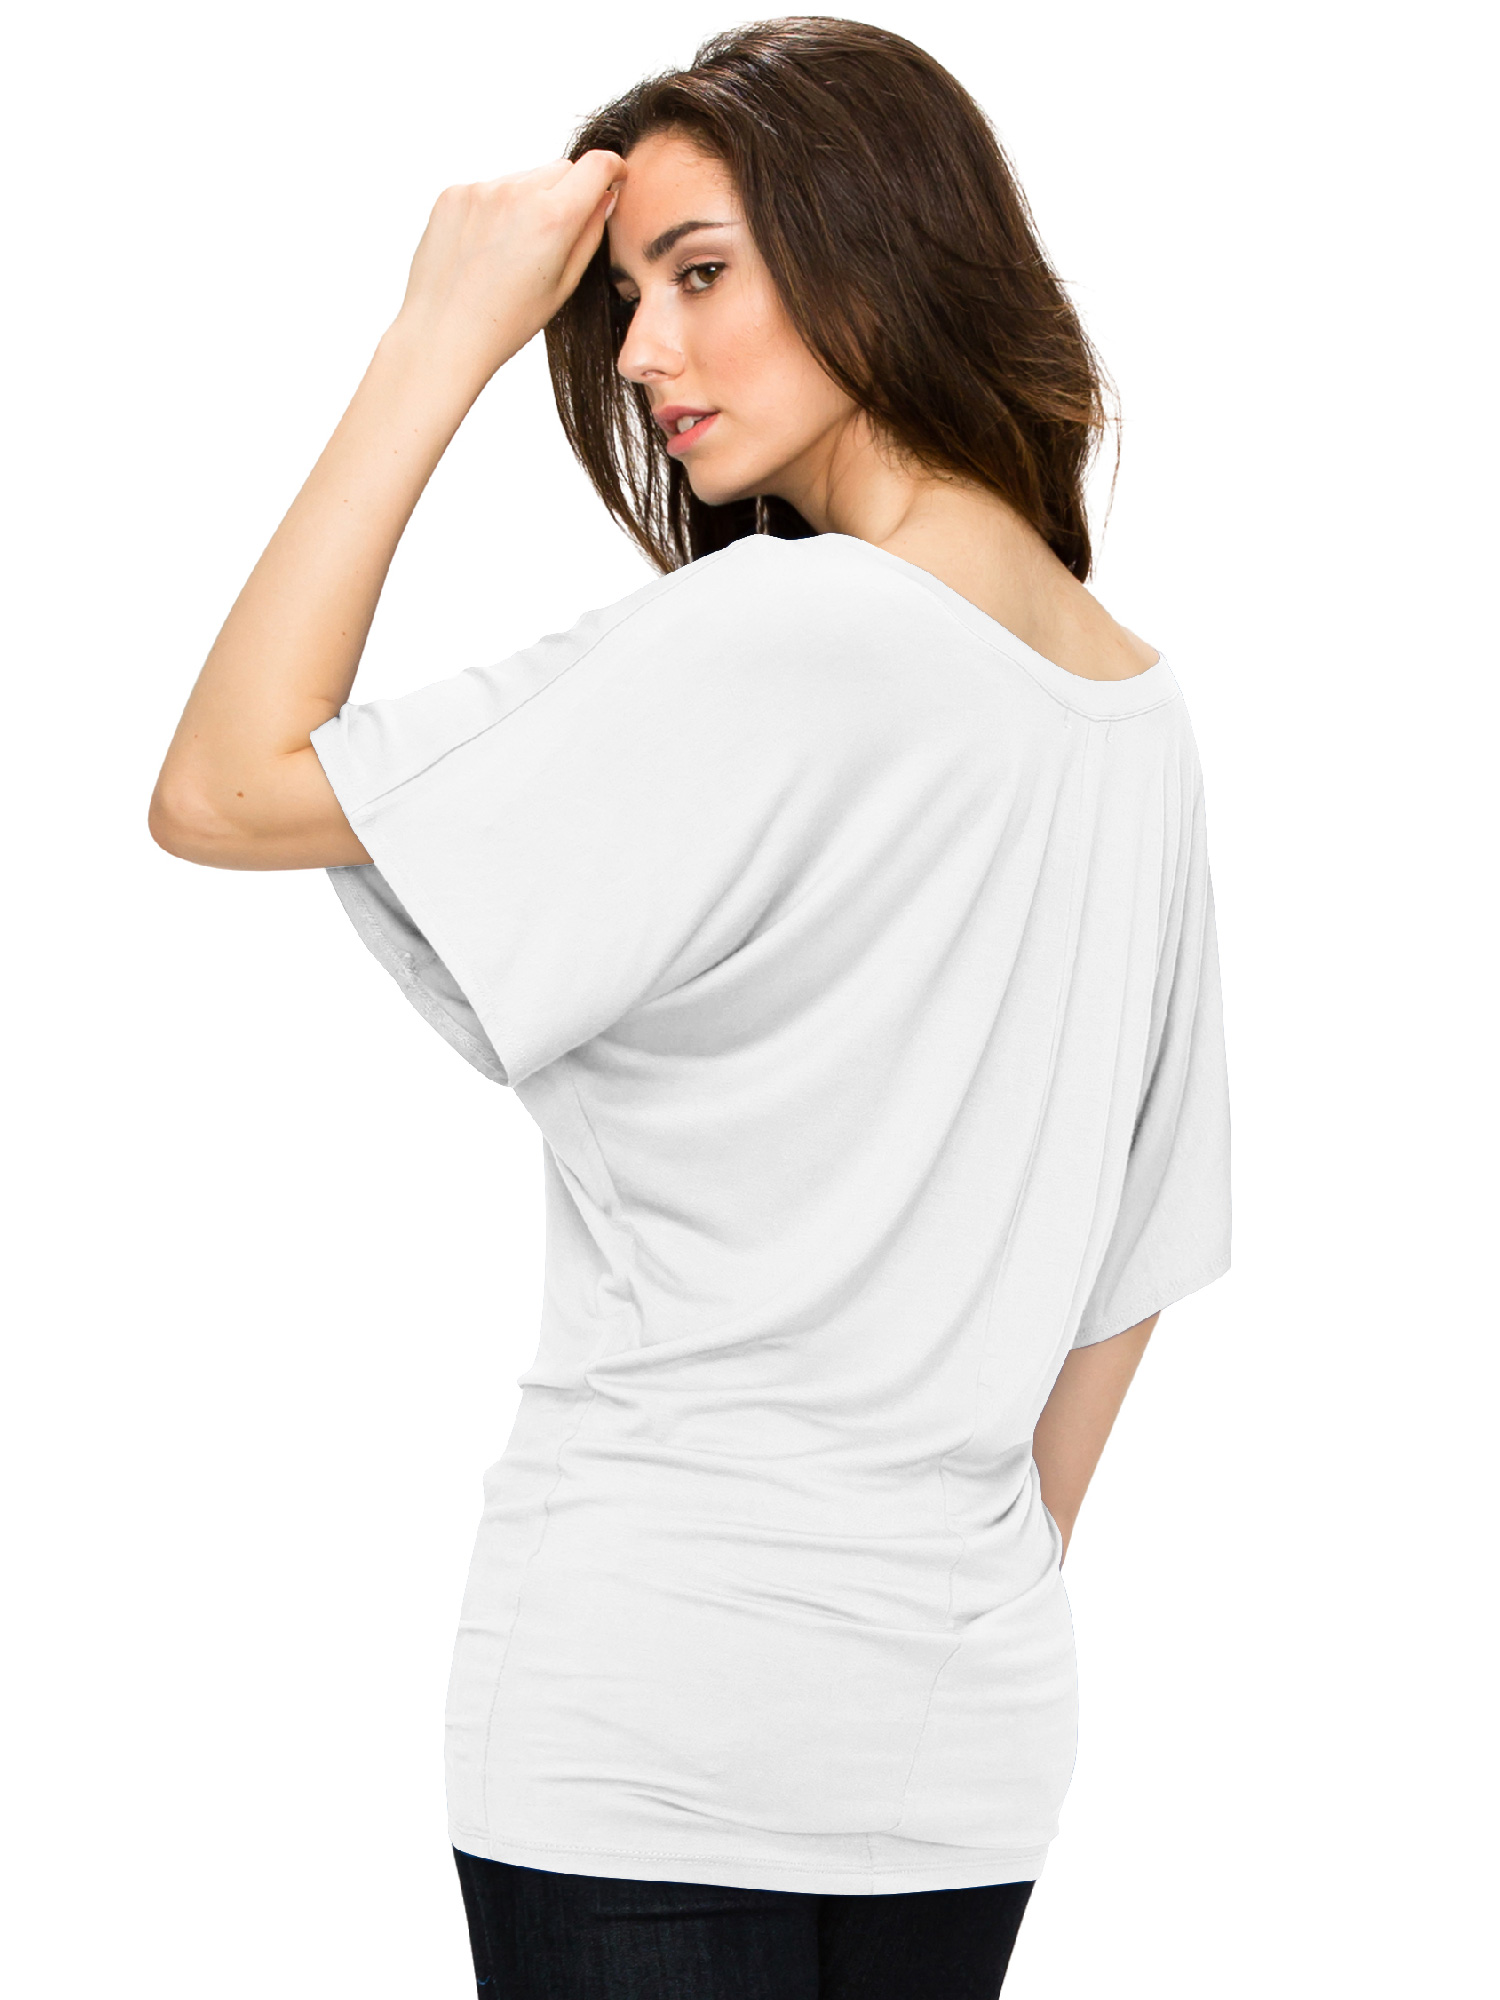 Made by Johnny Women's Boat Neck Short Sleeve Dolman Drape Top S WHITE - image 4 of 6